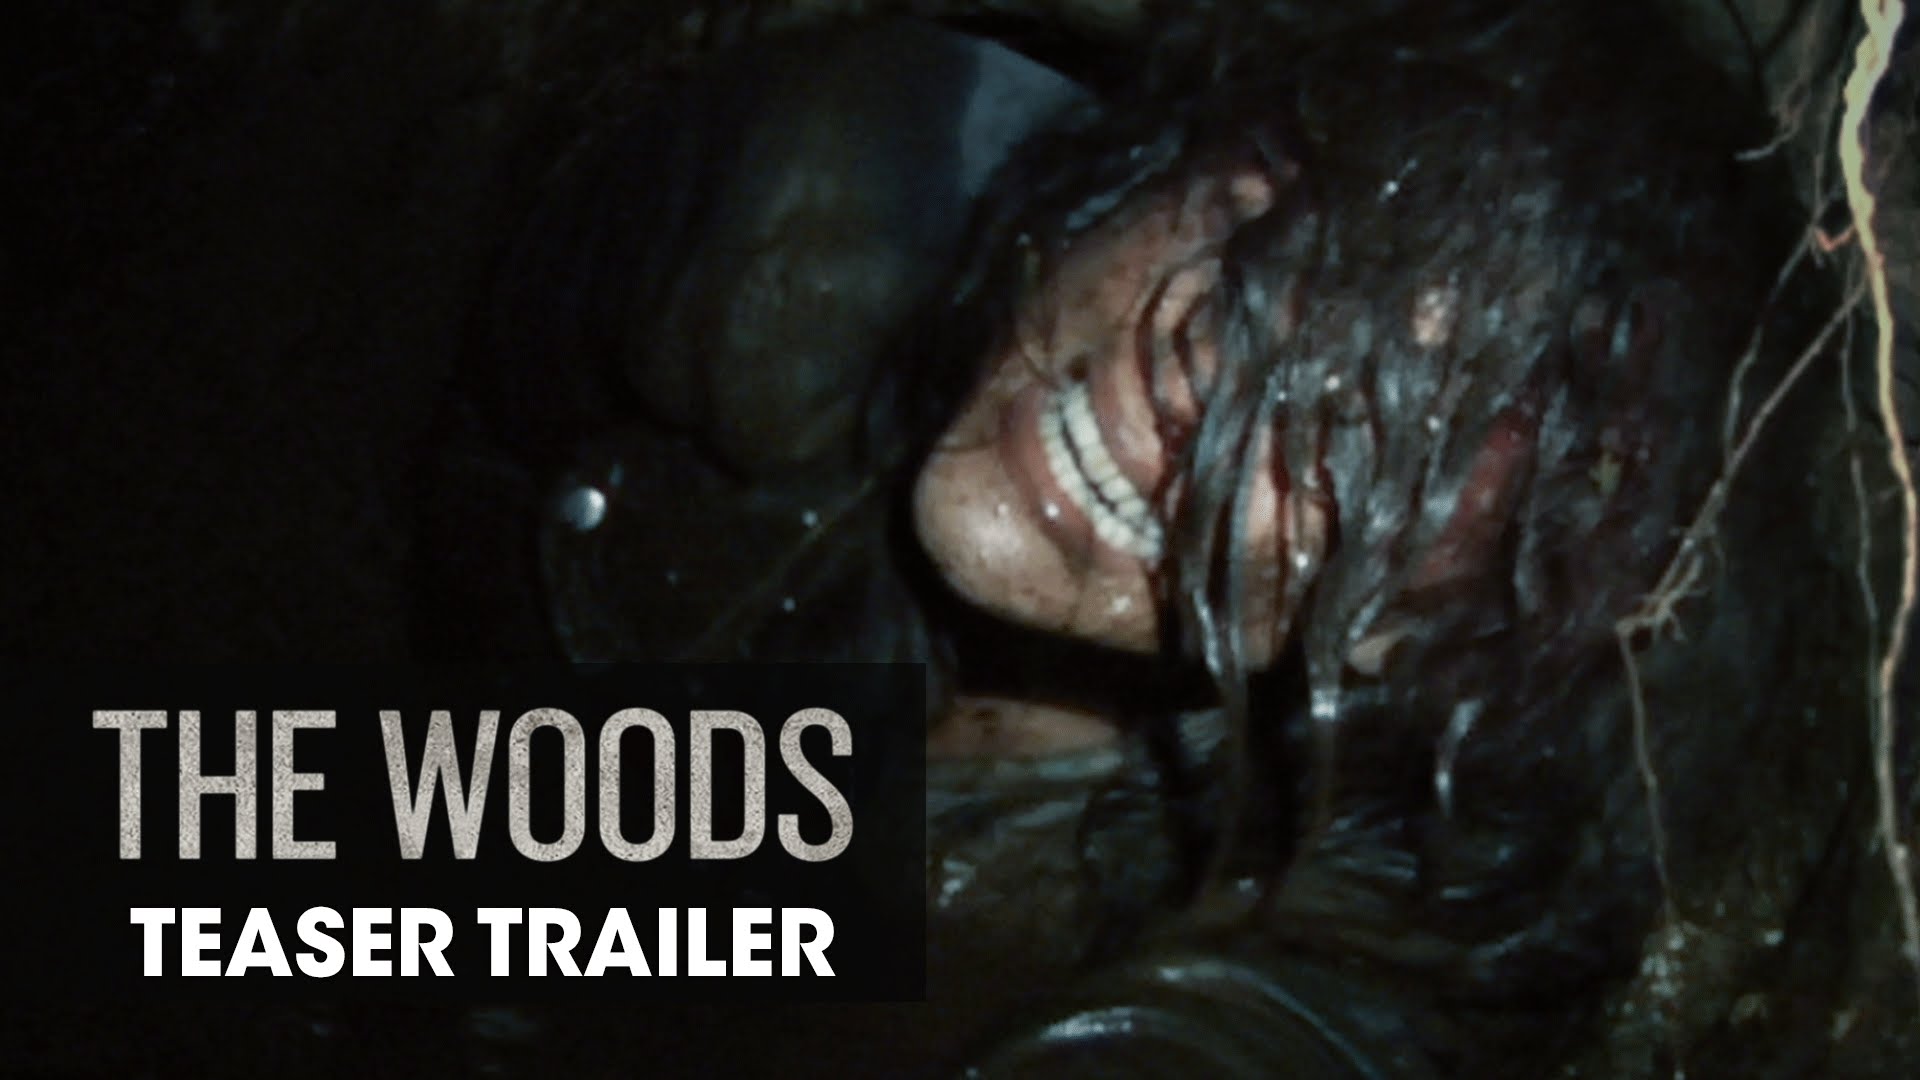 The Woods (2016 Movie) – Official Teaser Trailer